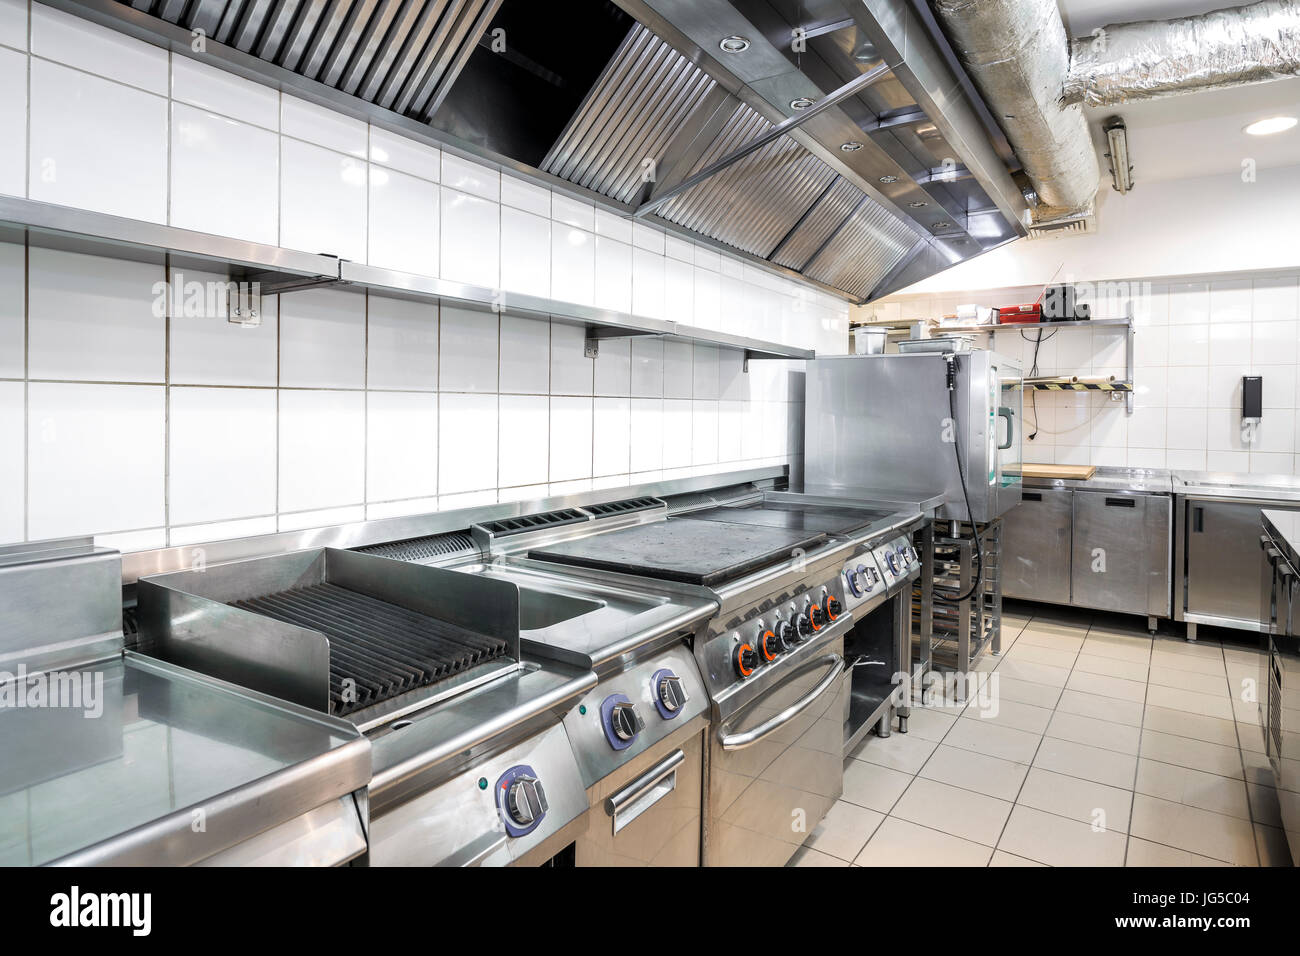 Modern kitchen in the restaurant with stainless equipment Stock Photo